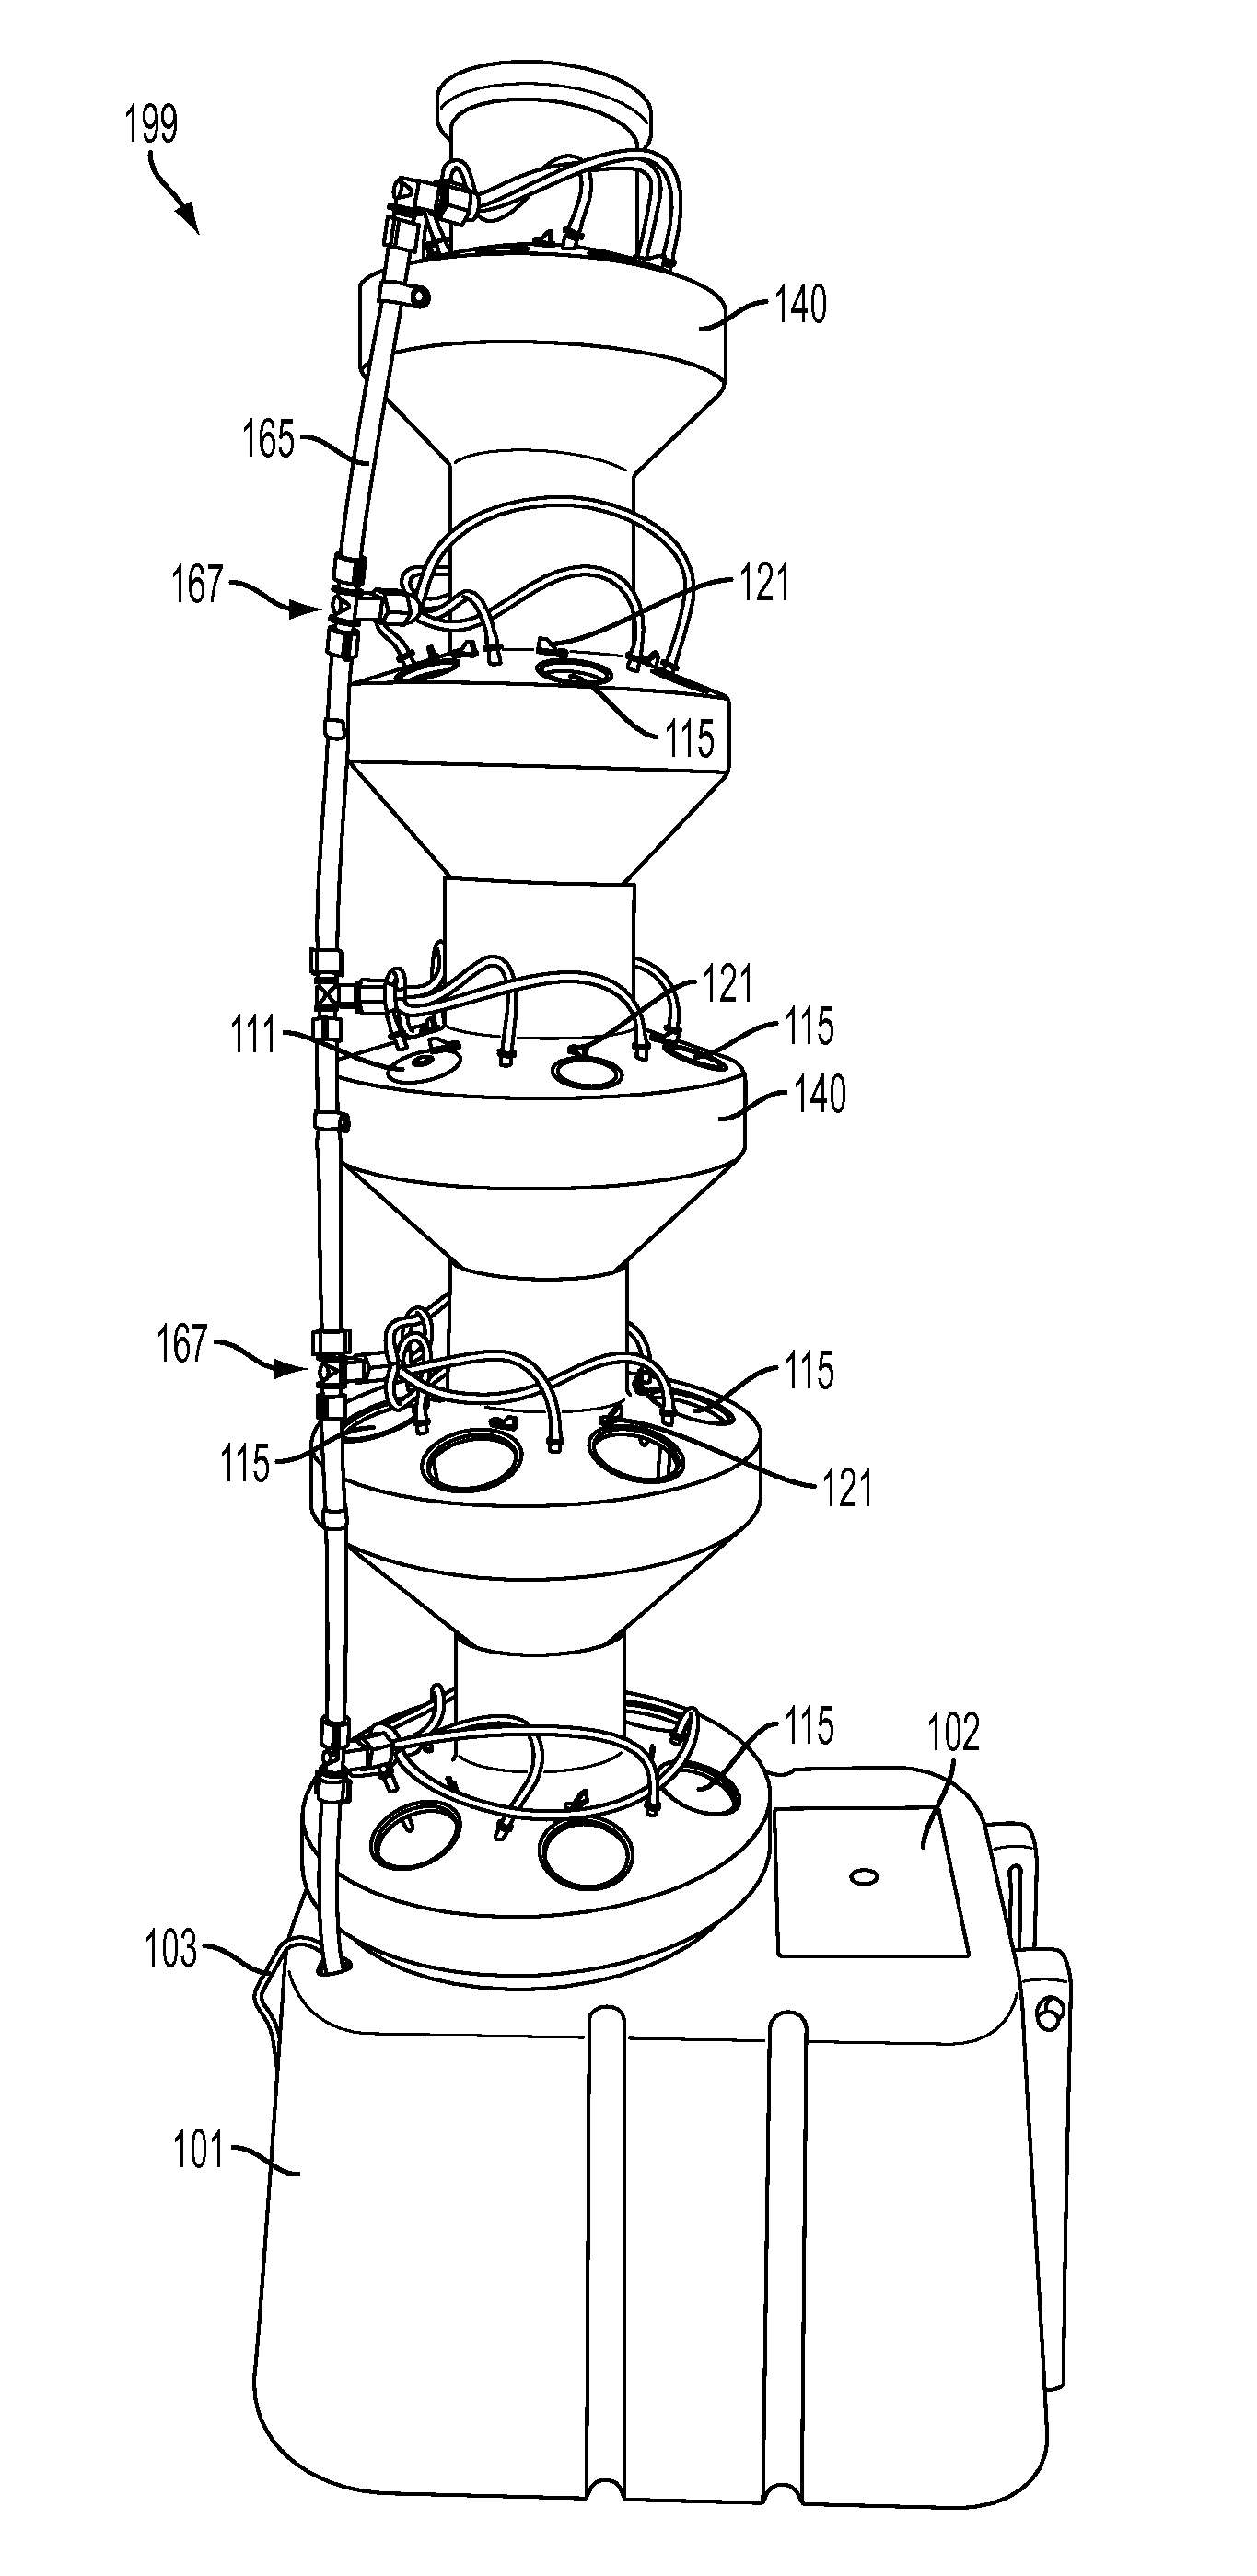 Apparatus for aeroponically growing and developing plants